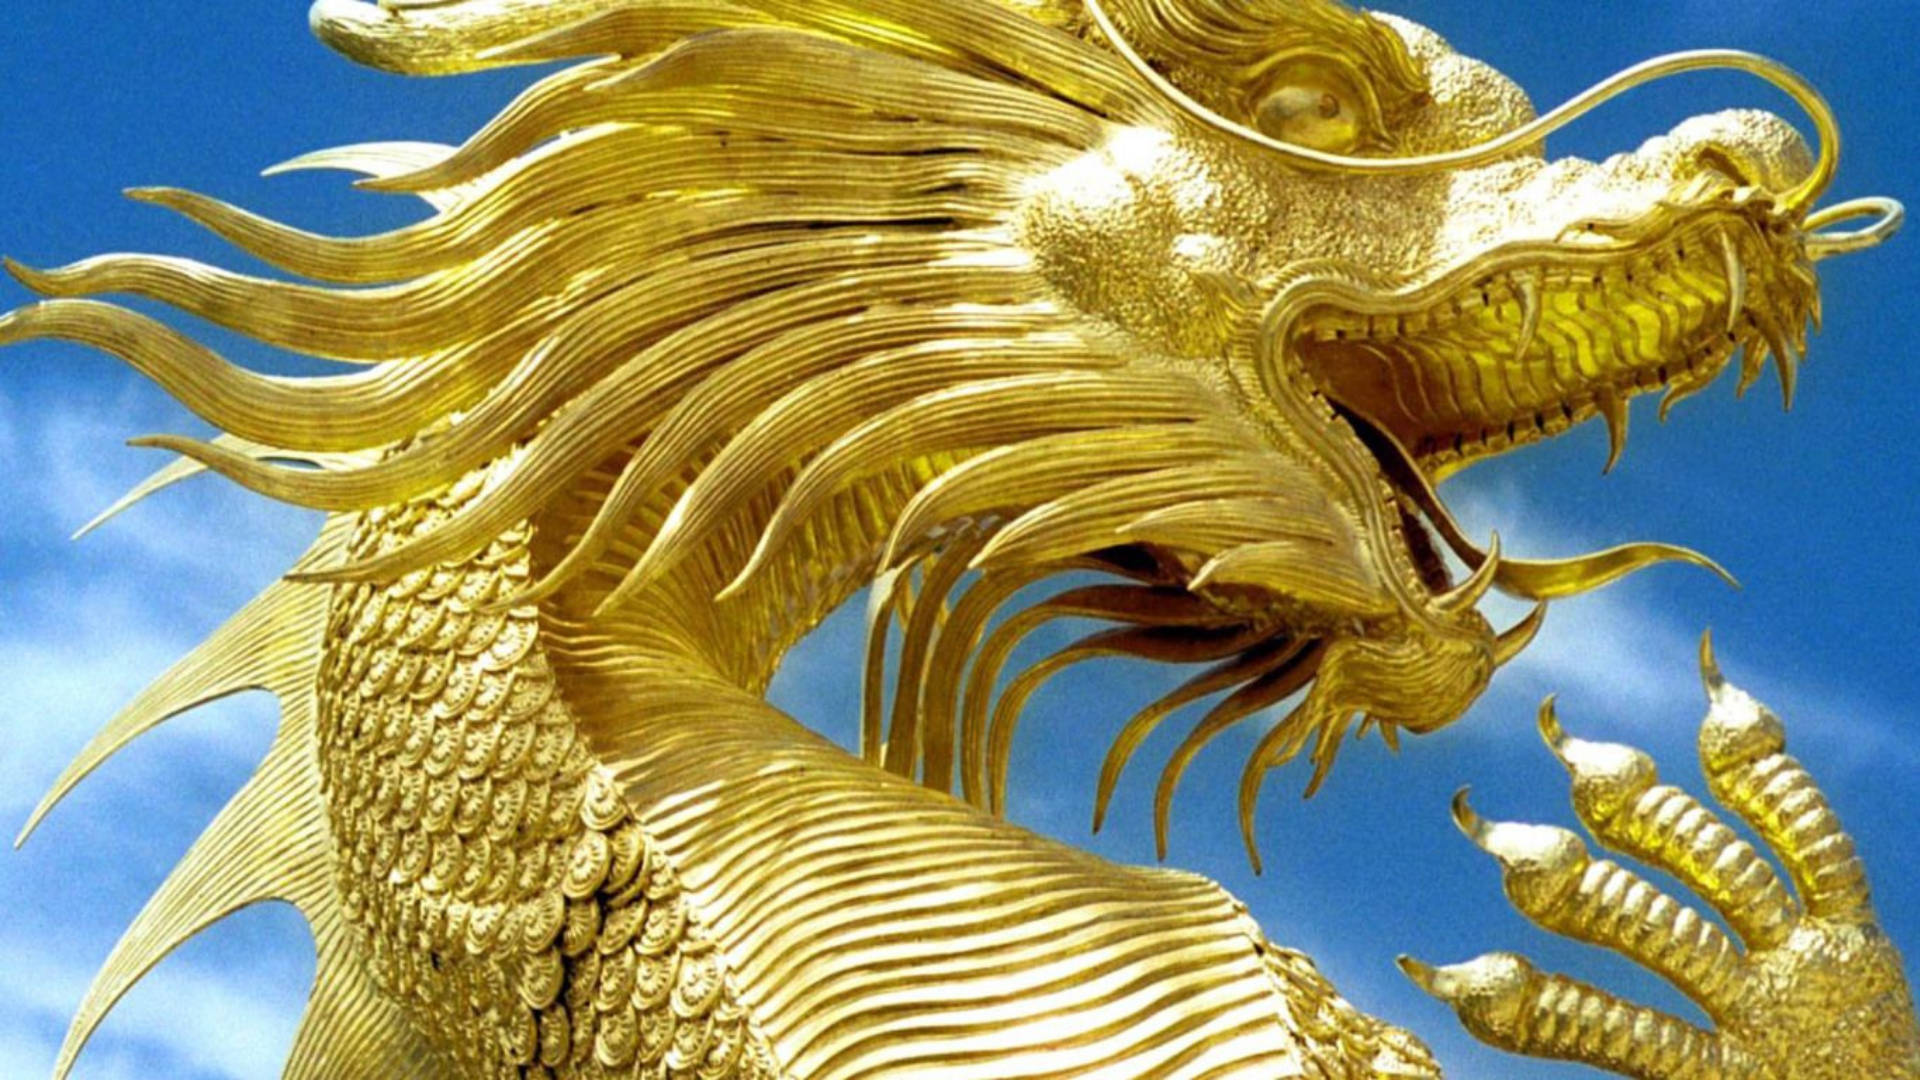 Golden Dragon Pictures